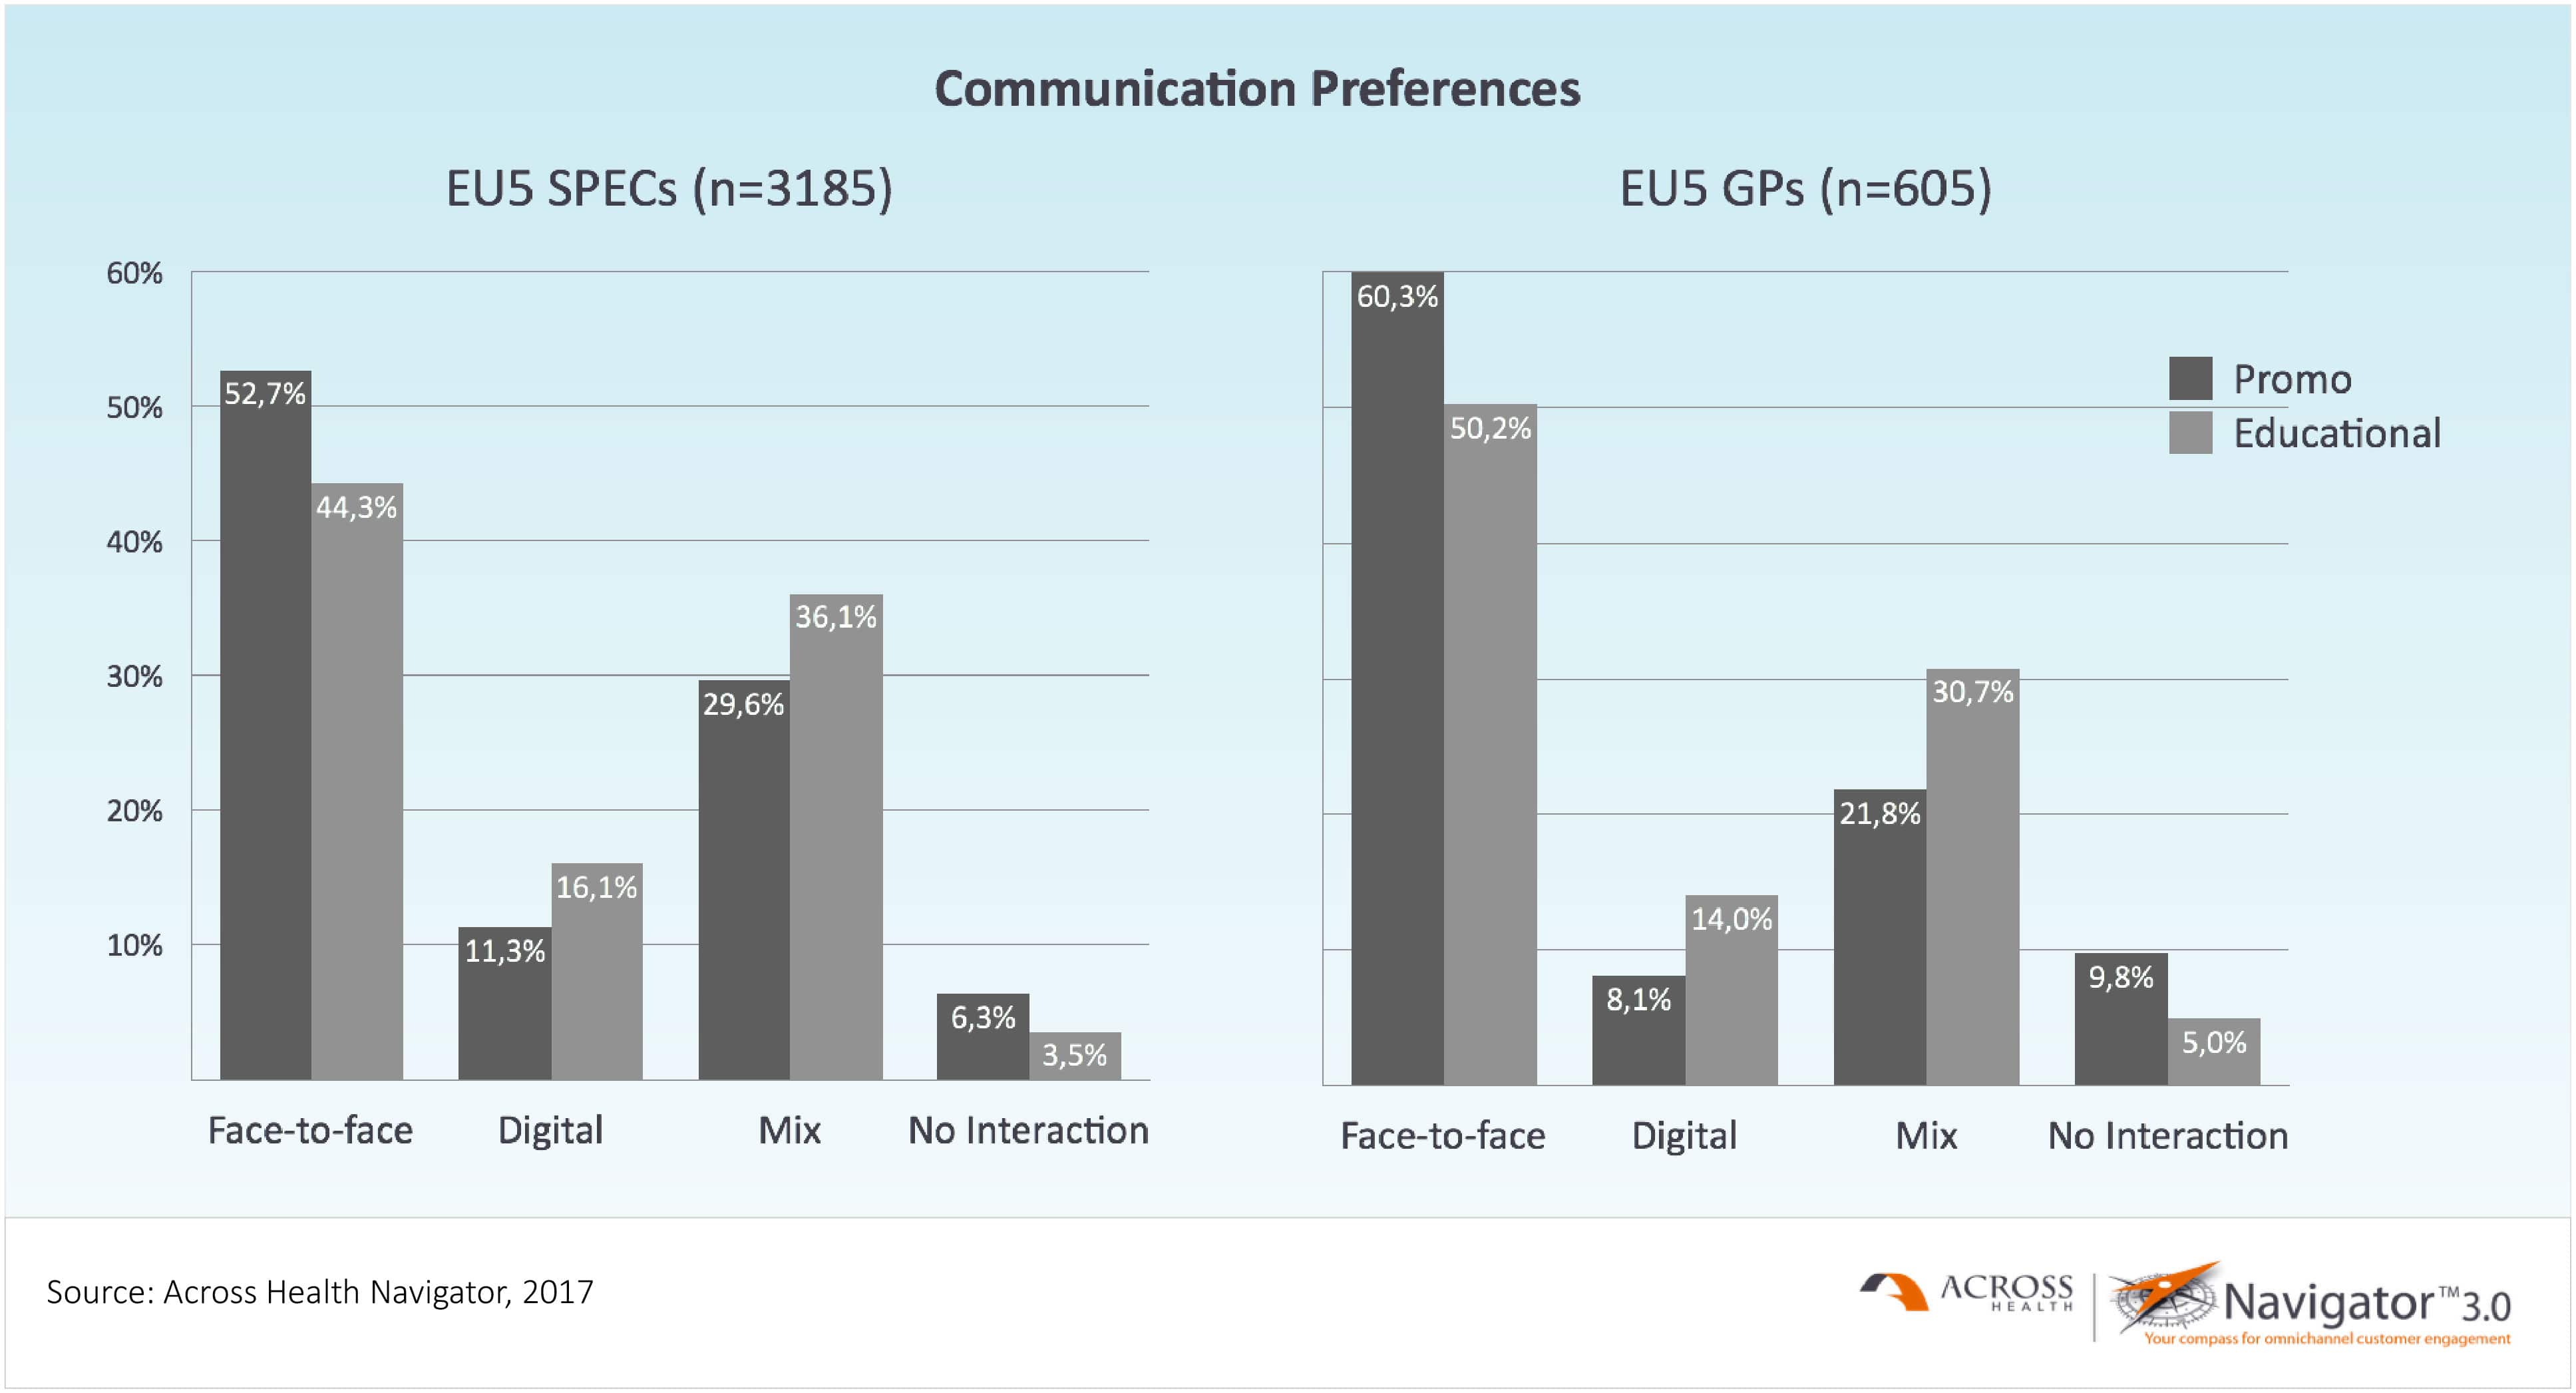 Communication Preferences Specialists and GPs (EU5)